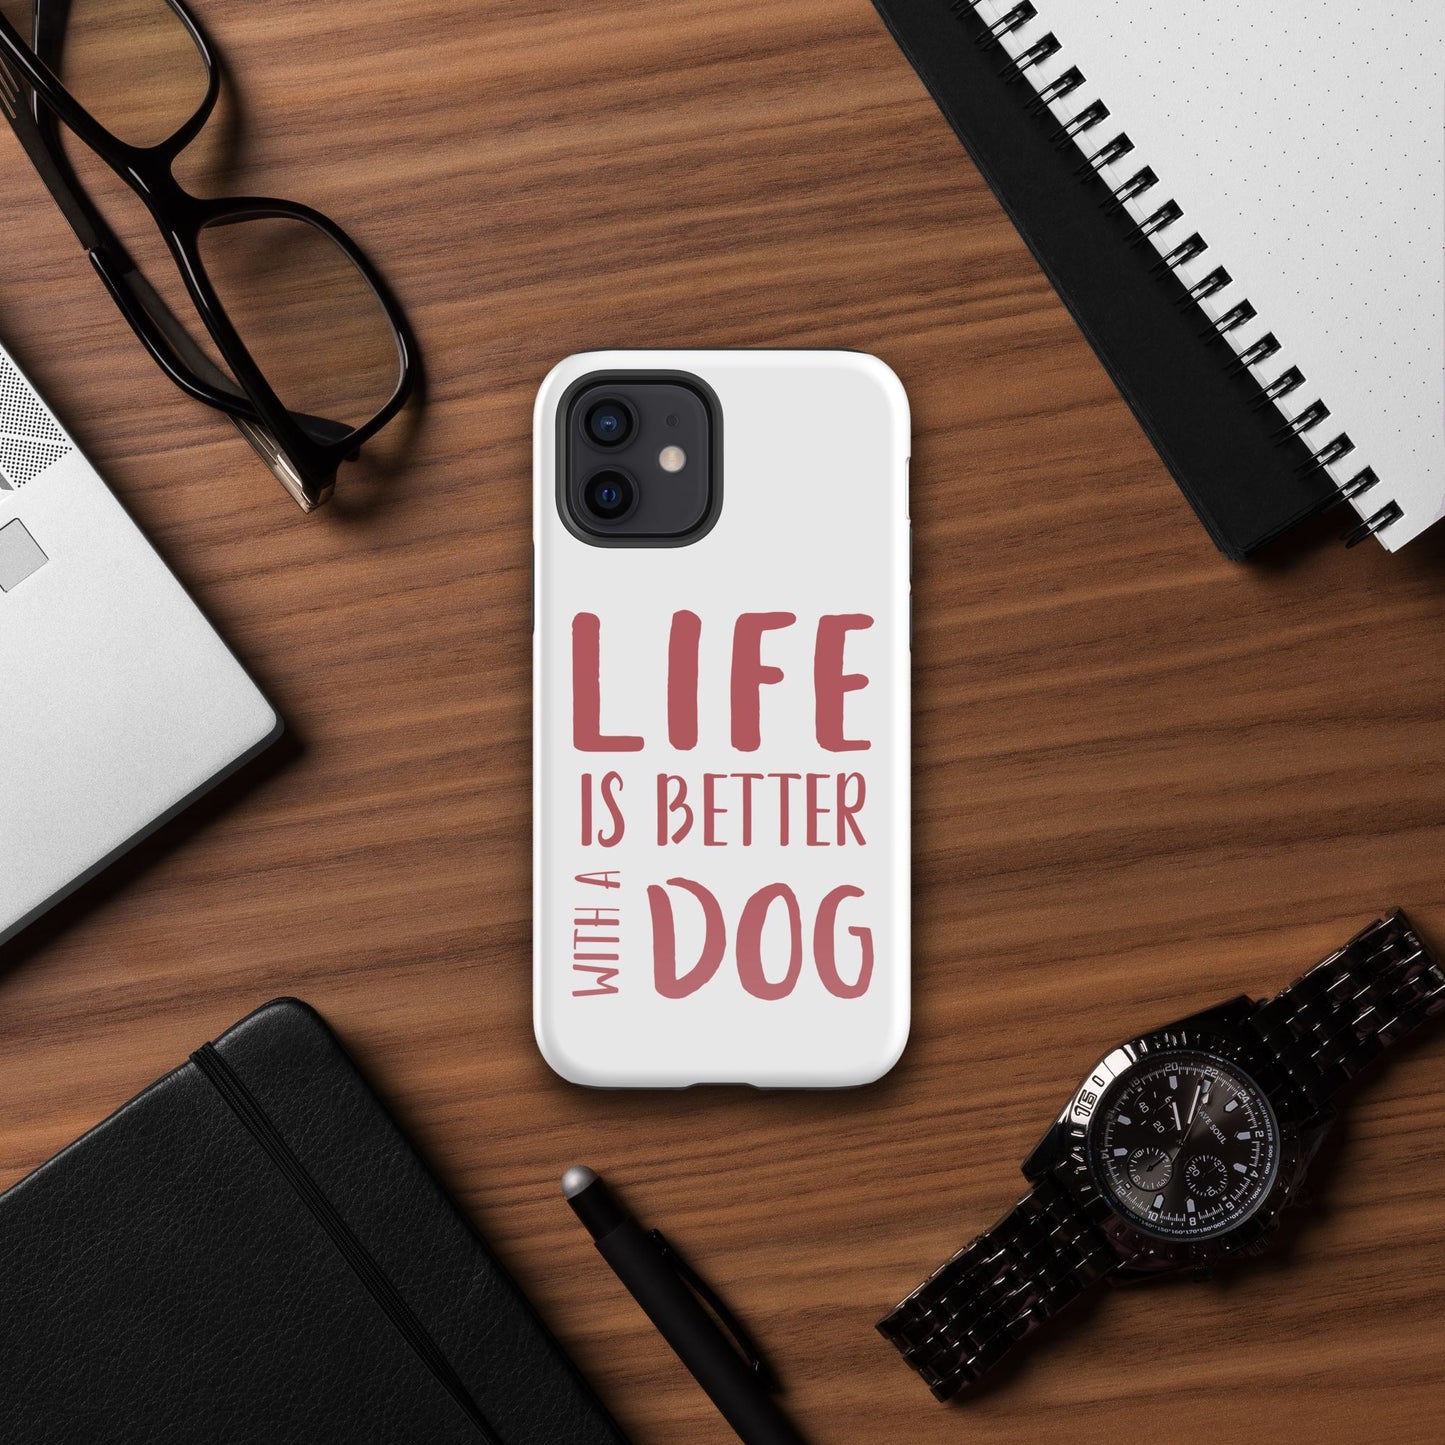 Life is Better with a Dog phone Case is the perfect way to show your love for the furry friends in your life. The phone case is designed to provide protection and comfort with its form-fitting design and shock absorbent materials. Plus, it features a stylish graphic showcasing your canine companions. Show off your pup and protect your phone with this reliable case!